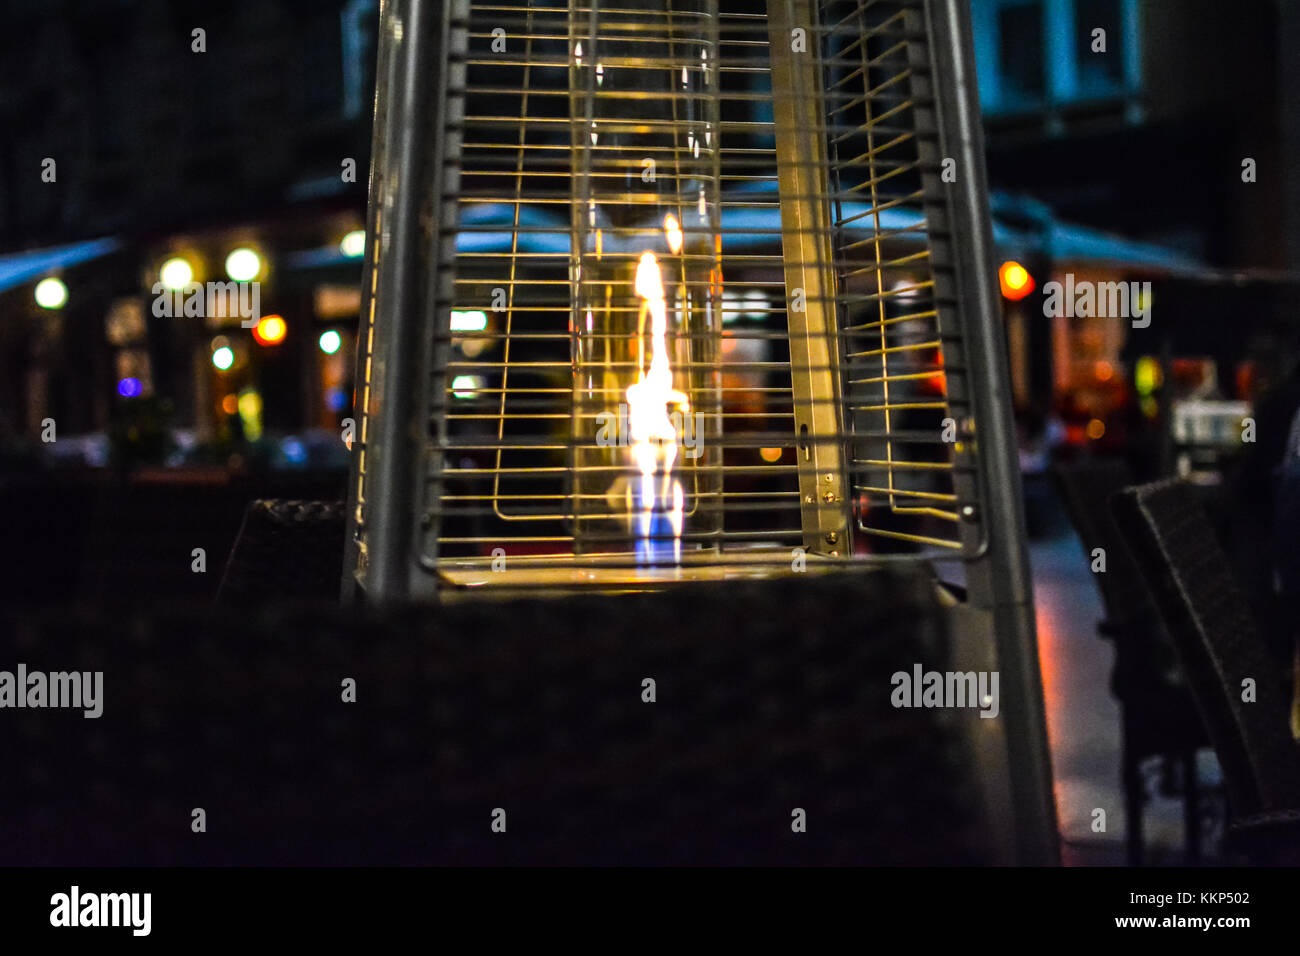 A flame heater keeps tables warm in the late evening at an outdoor cafe in Split Croatia. Stock Photo